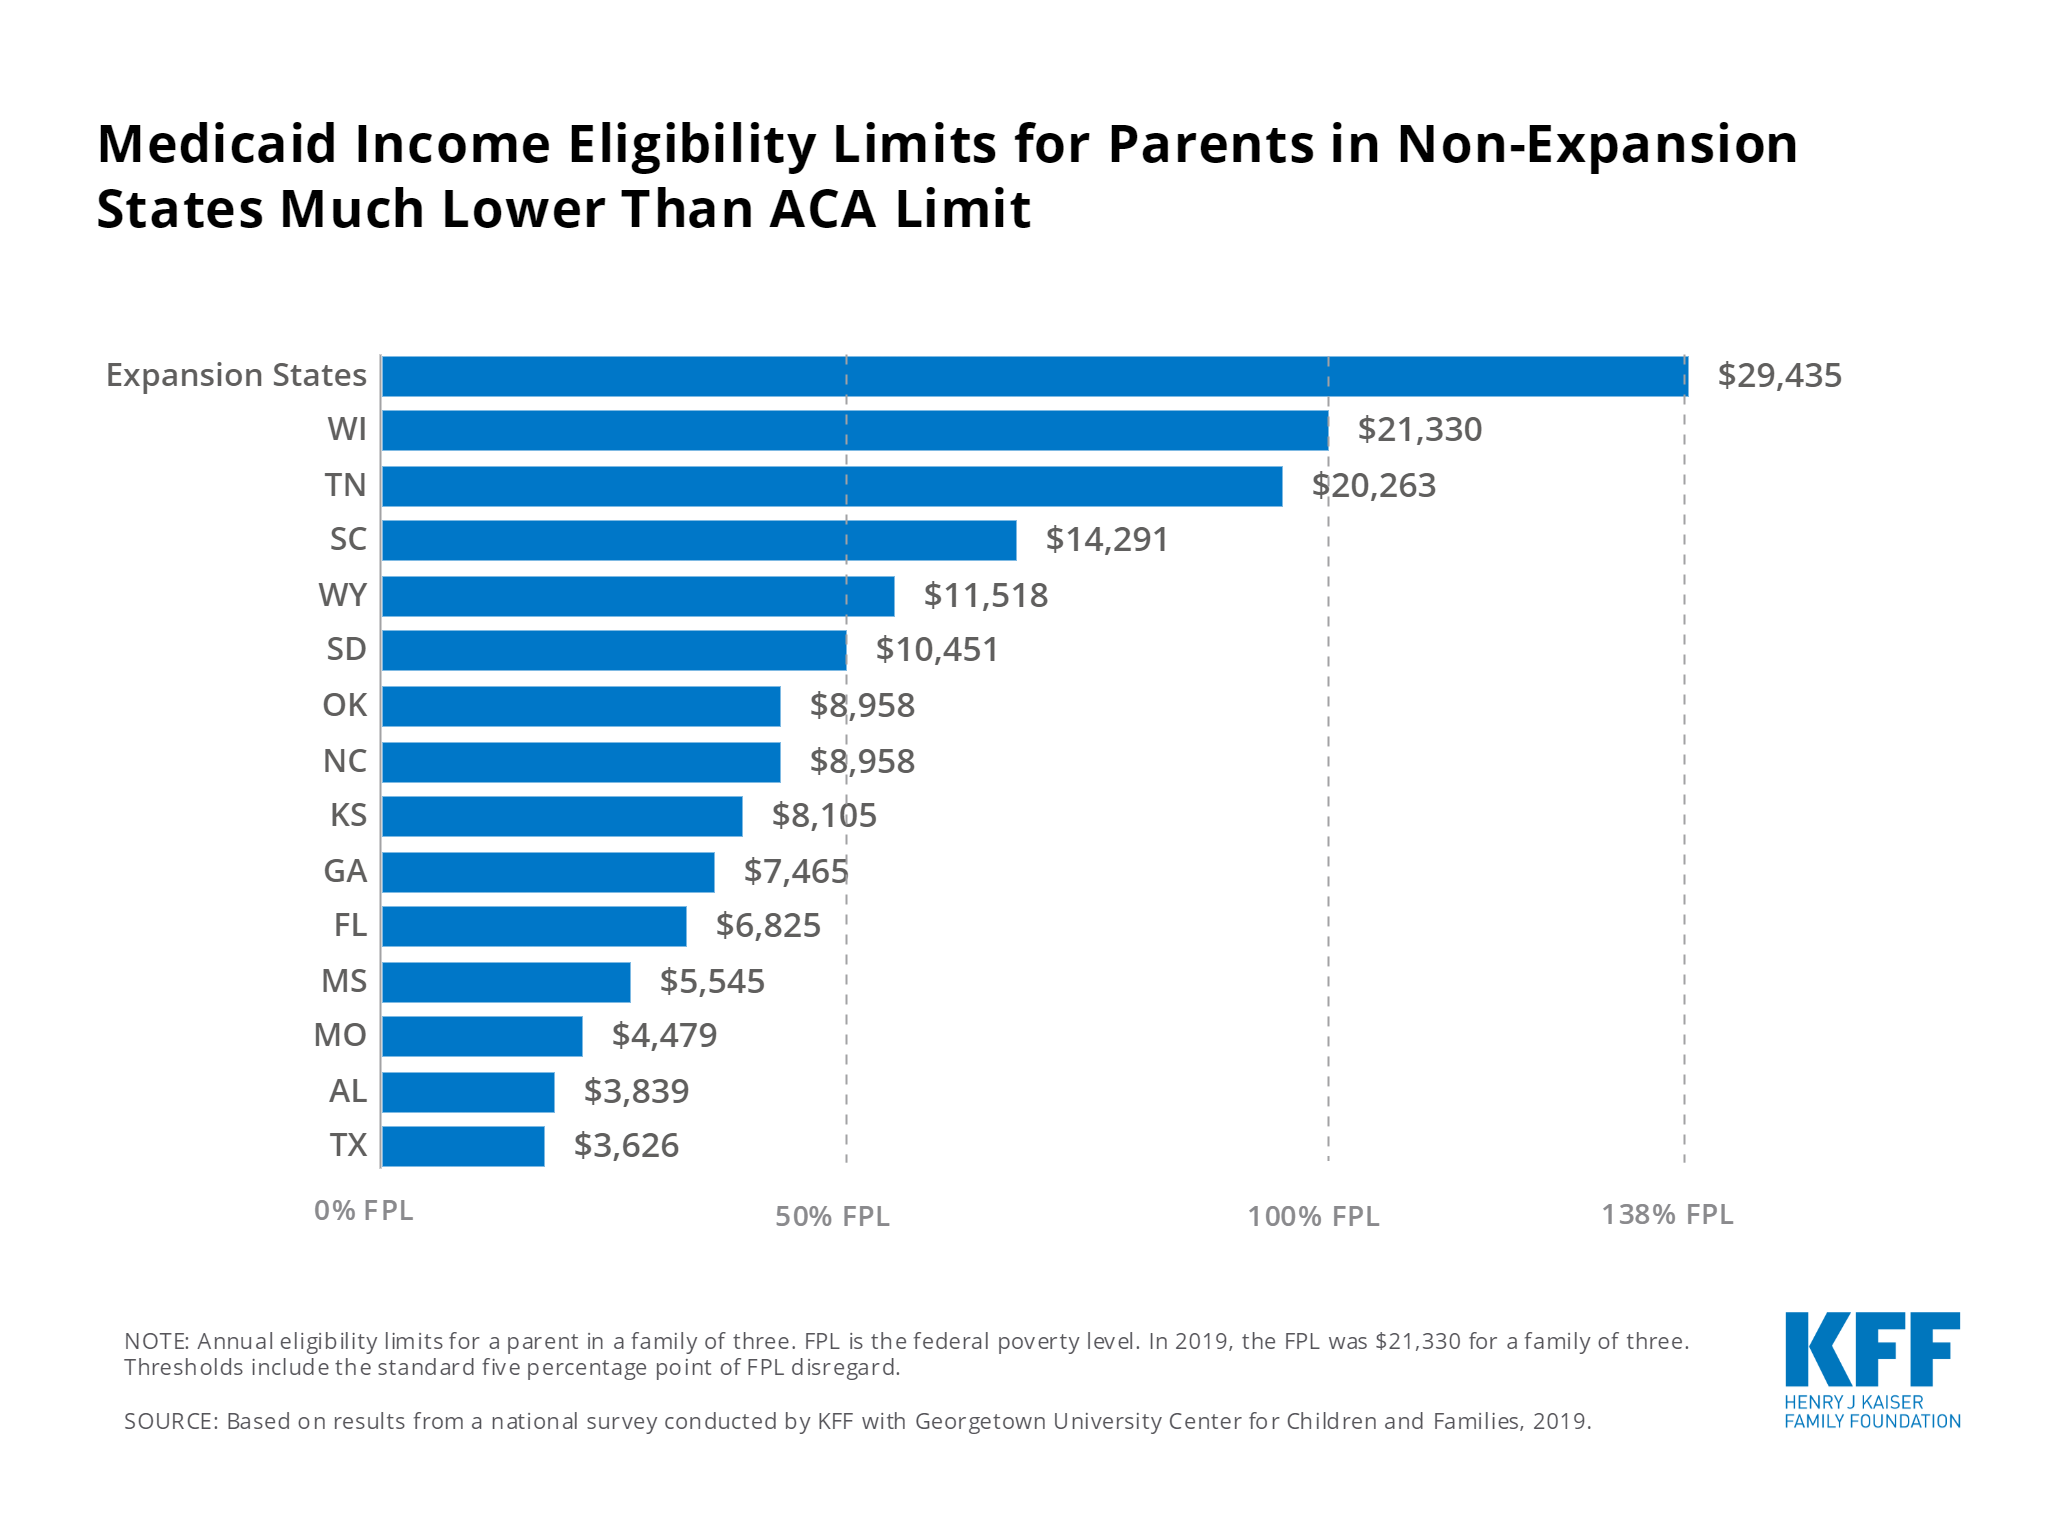 Medicaid Income Eligibility Limits for Parents in Non